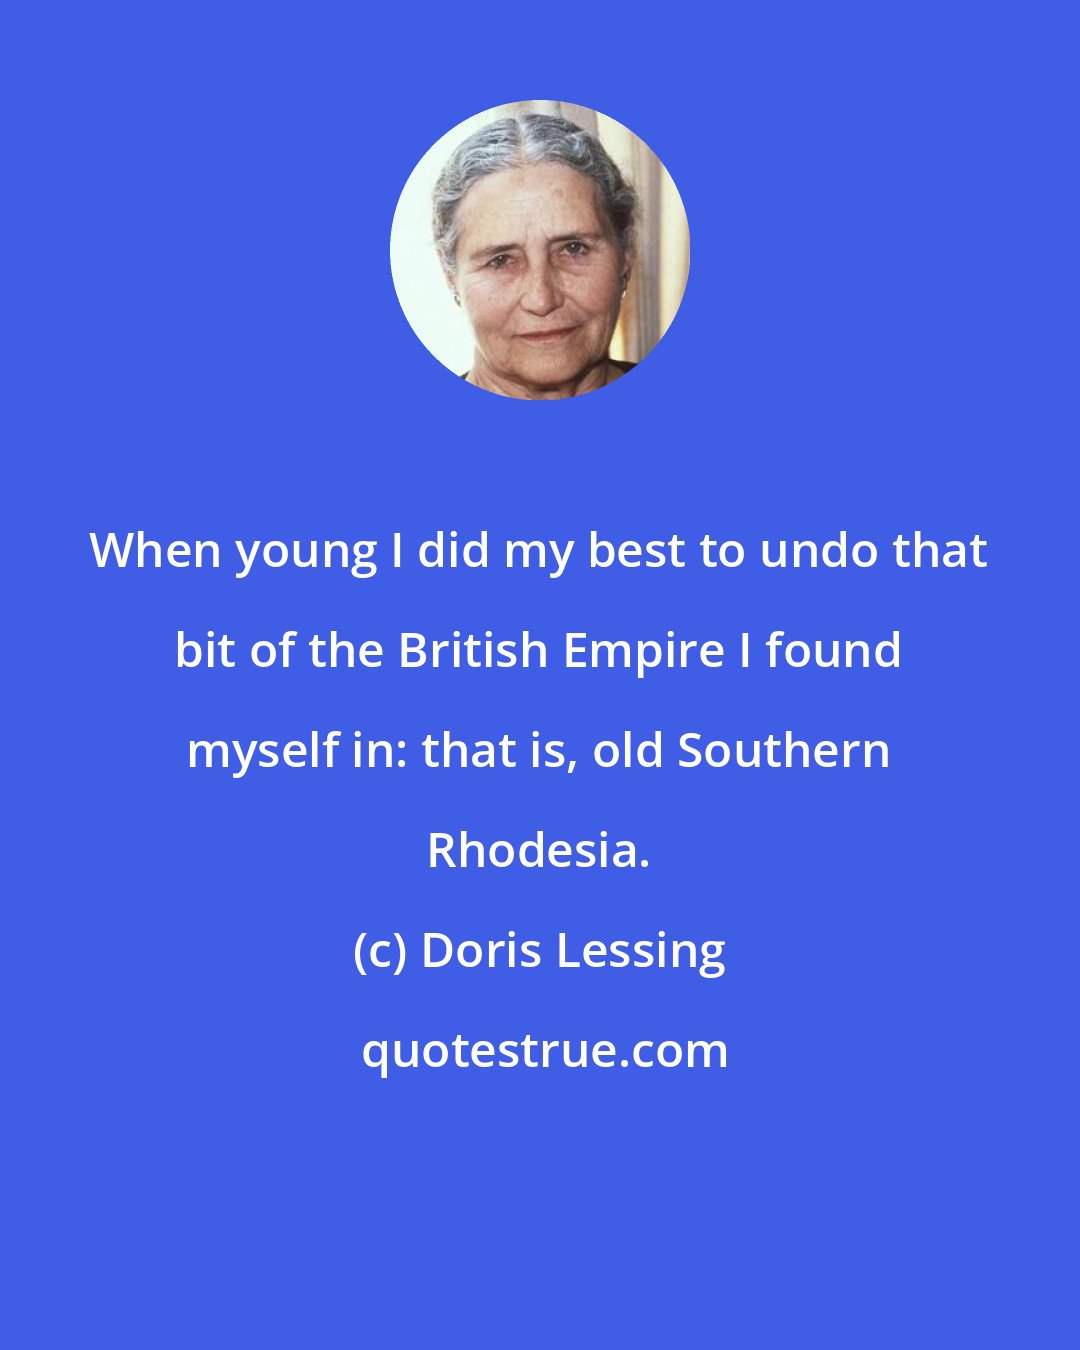 Doris Lessing: When young I did my best to undo that bit of the British Empire I found myself in: that is, old Southern Rhodesia.